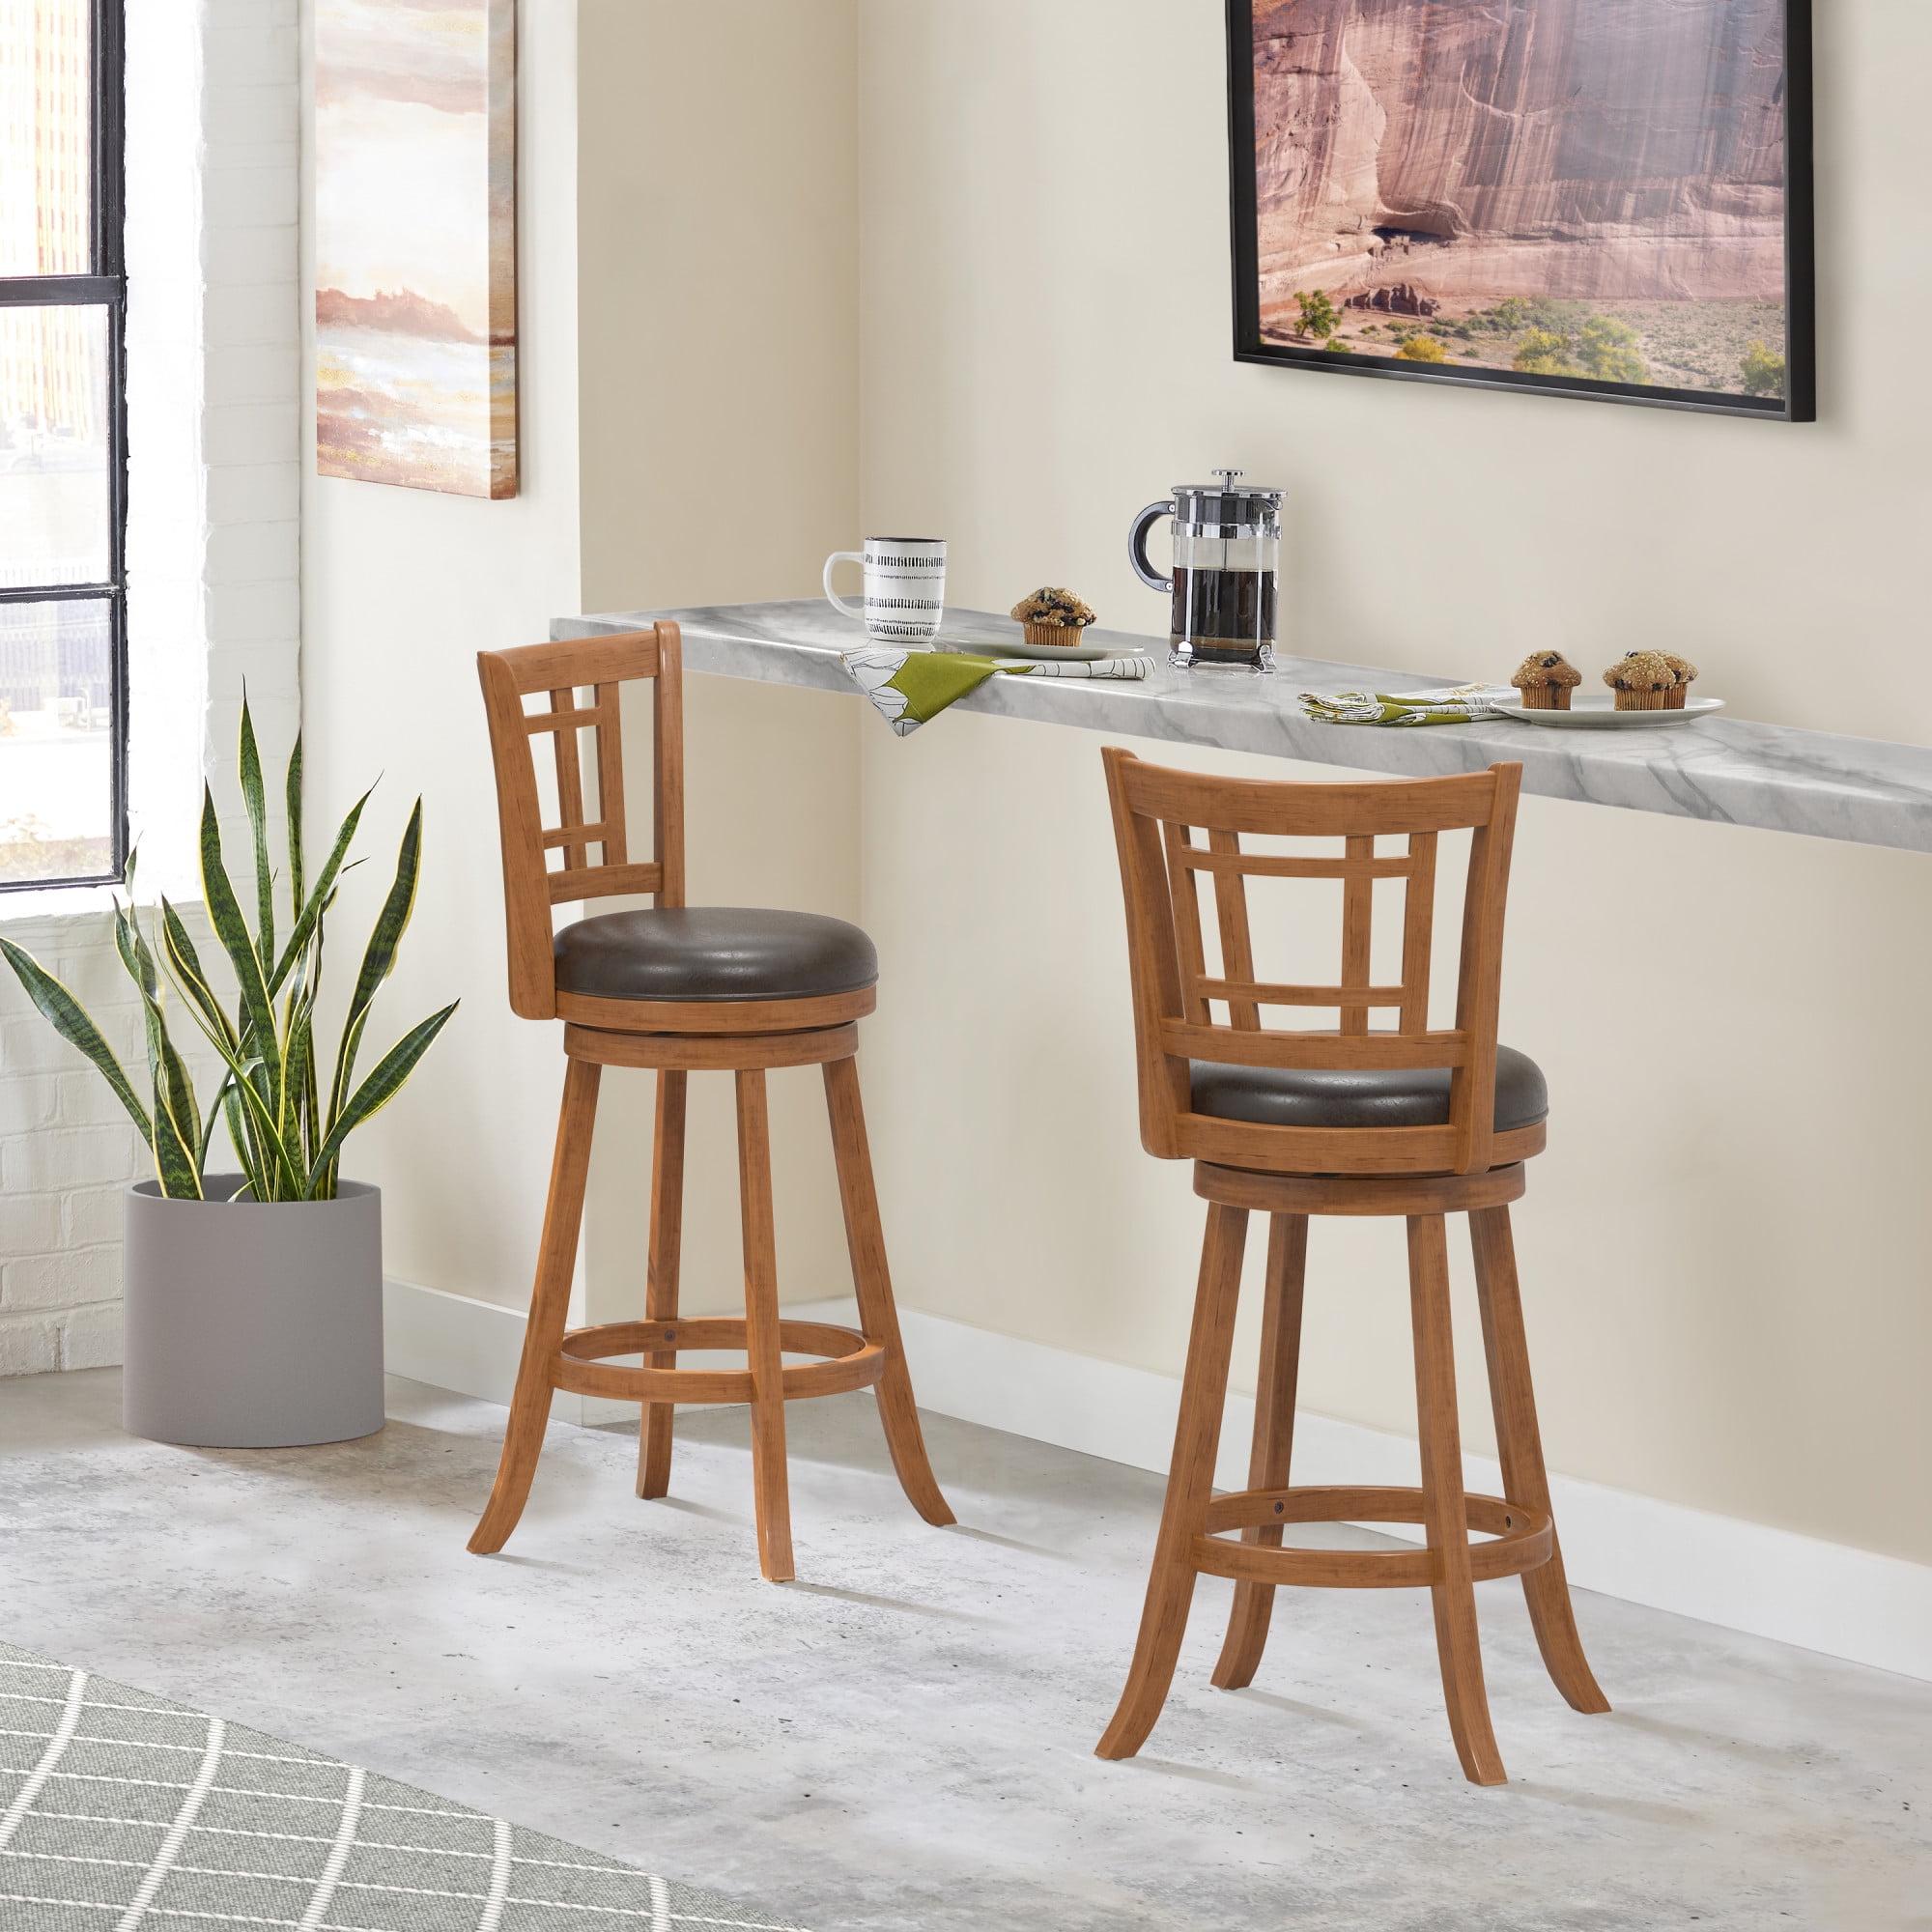 Transitional Oak Wood Swivel Bar Stool with Brown Faux Leather Seat